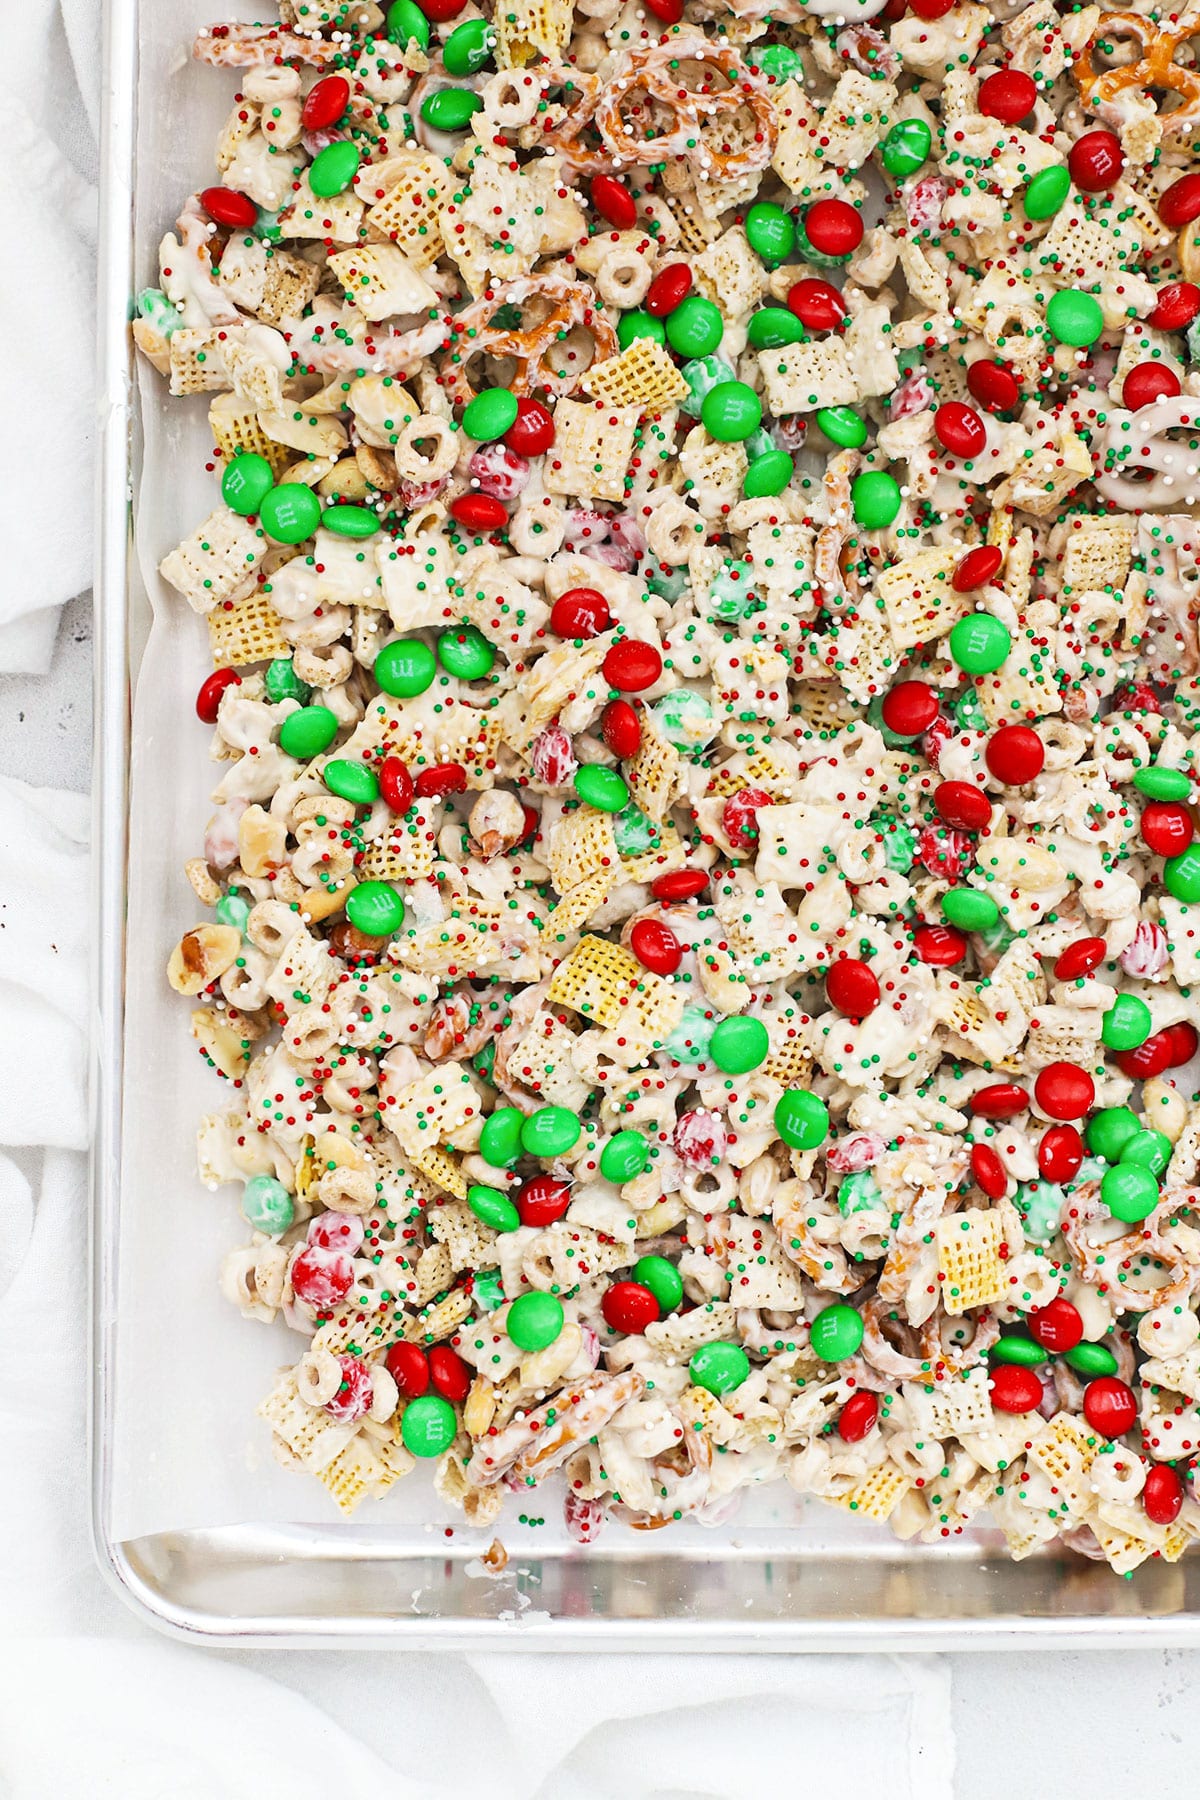 A whole pan of gluten-free Christmas chex with m&ms and pretzels